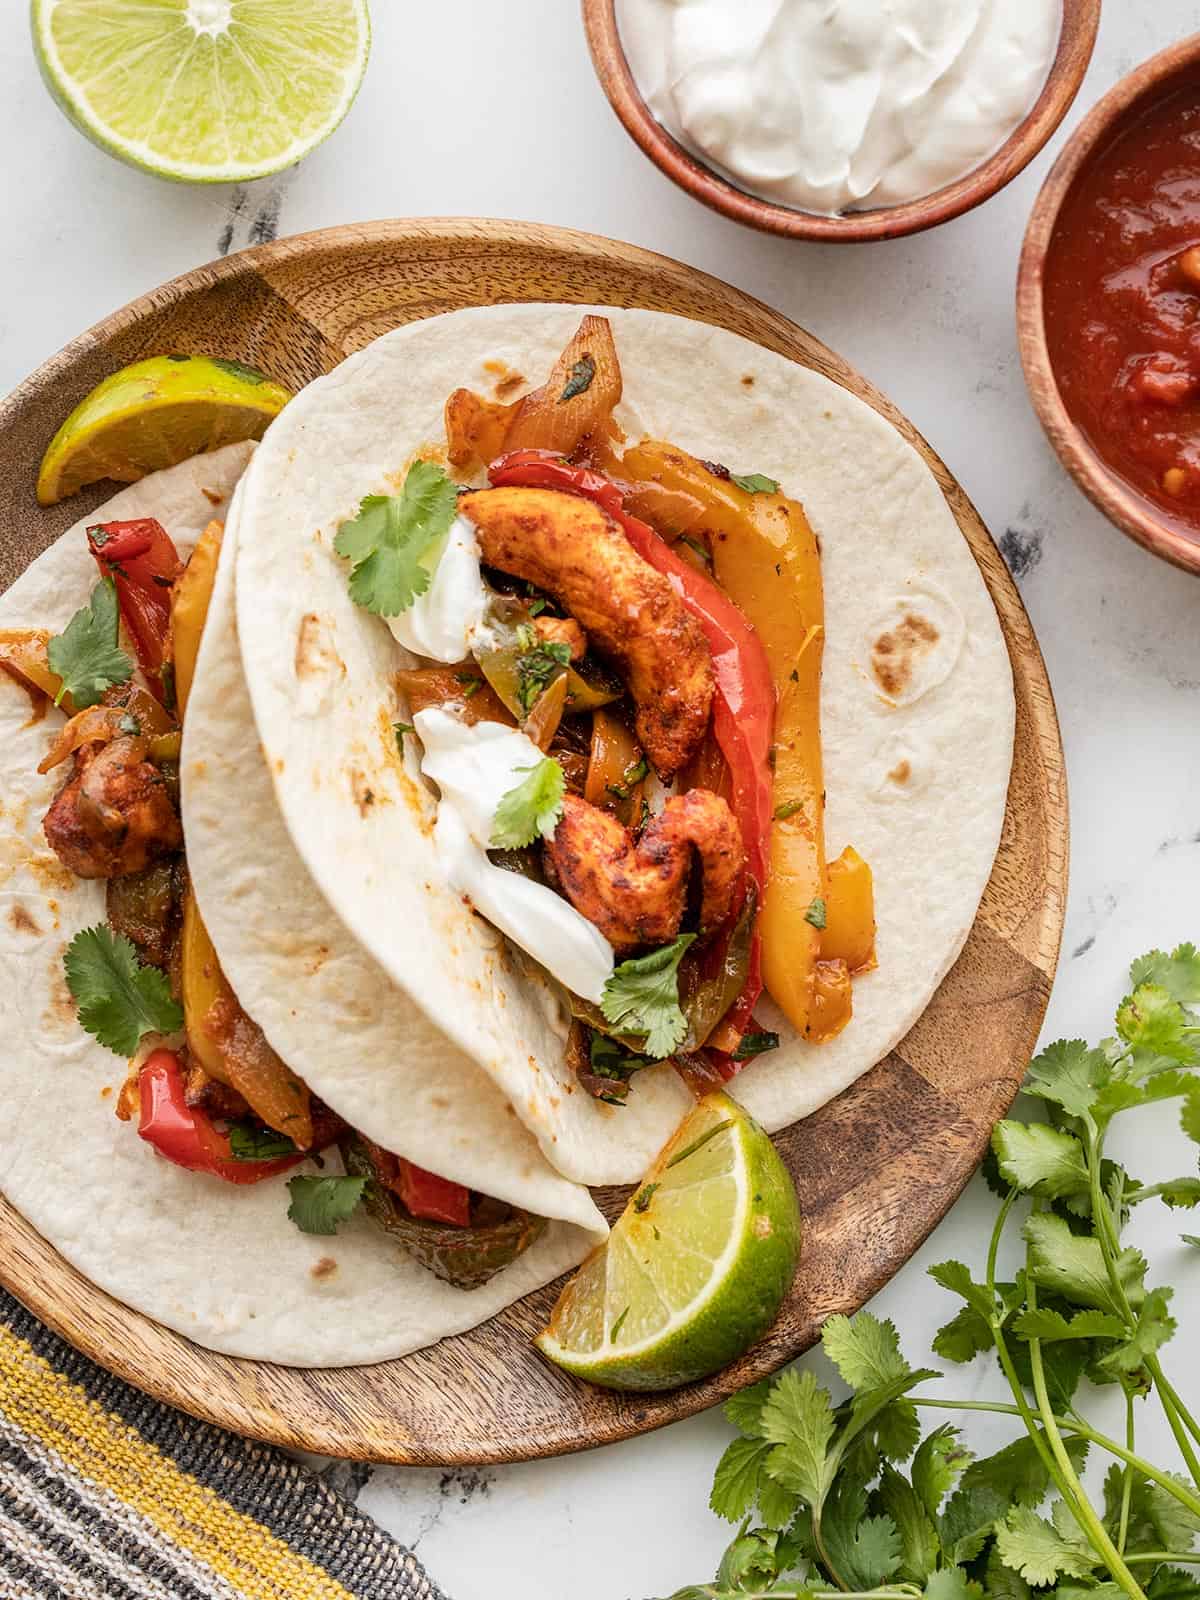 Two fajitas on a wooden plate with toppings on the sides